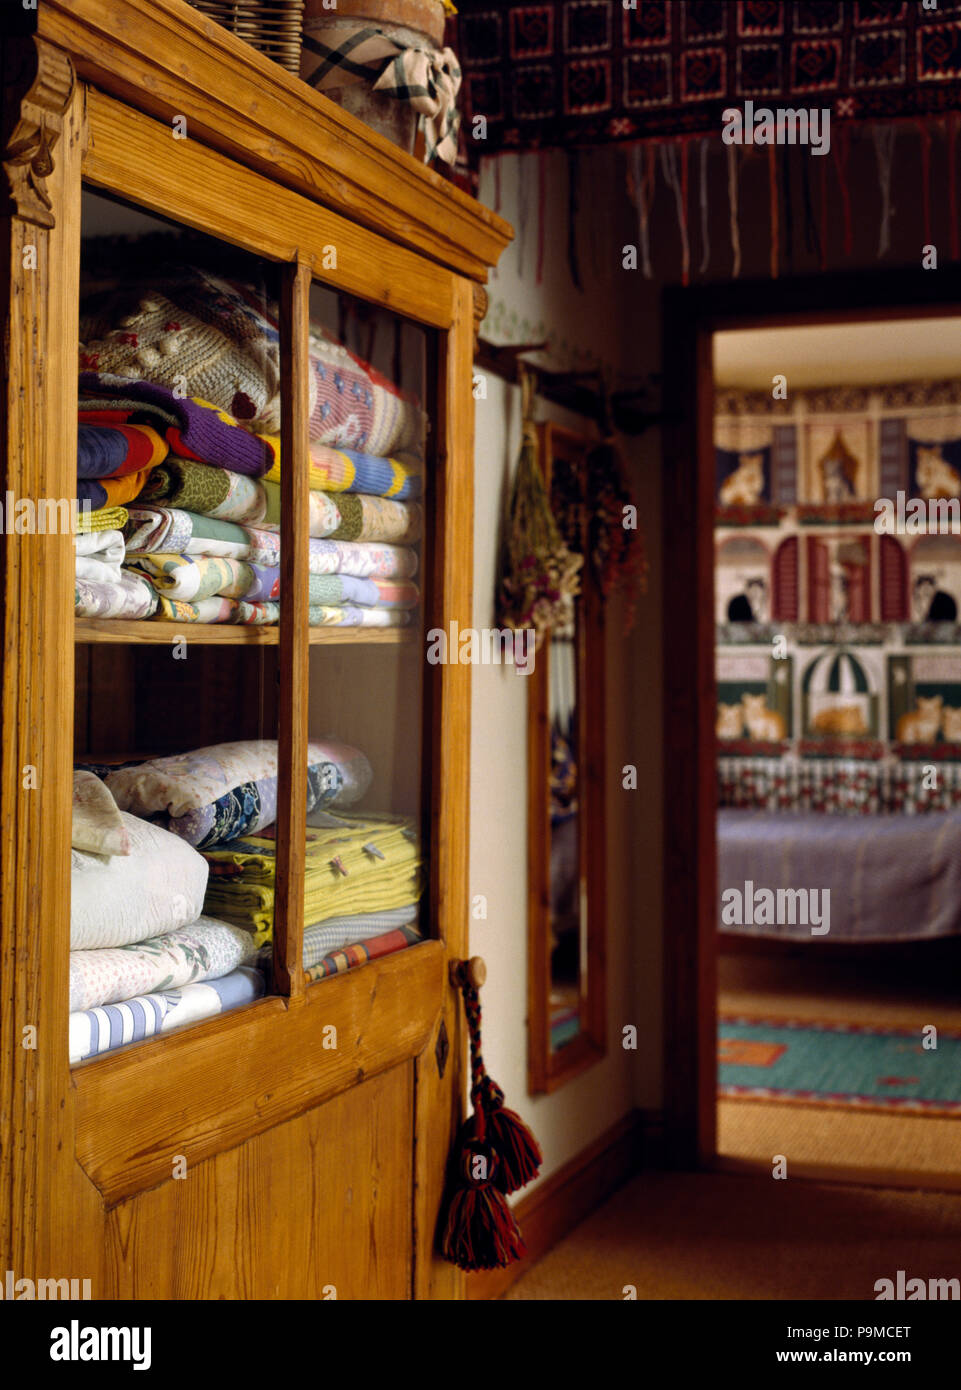 Folded quilts in a glass front cupboard in an nineties country hall Stock Photo